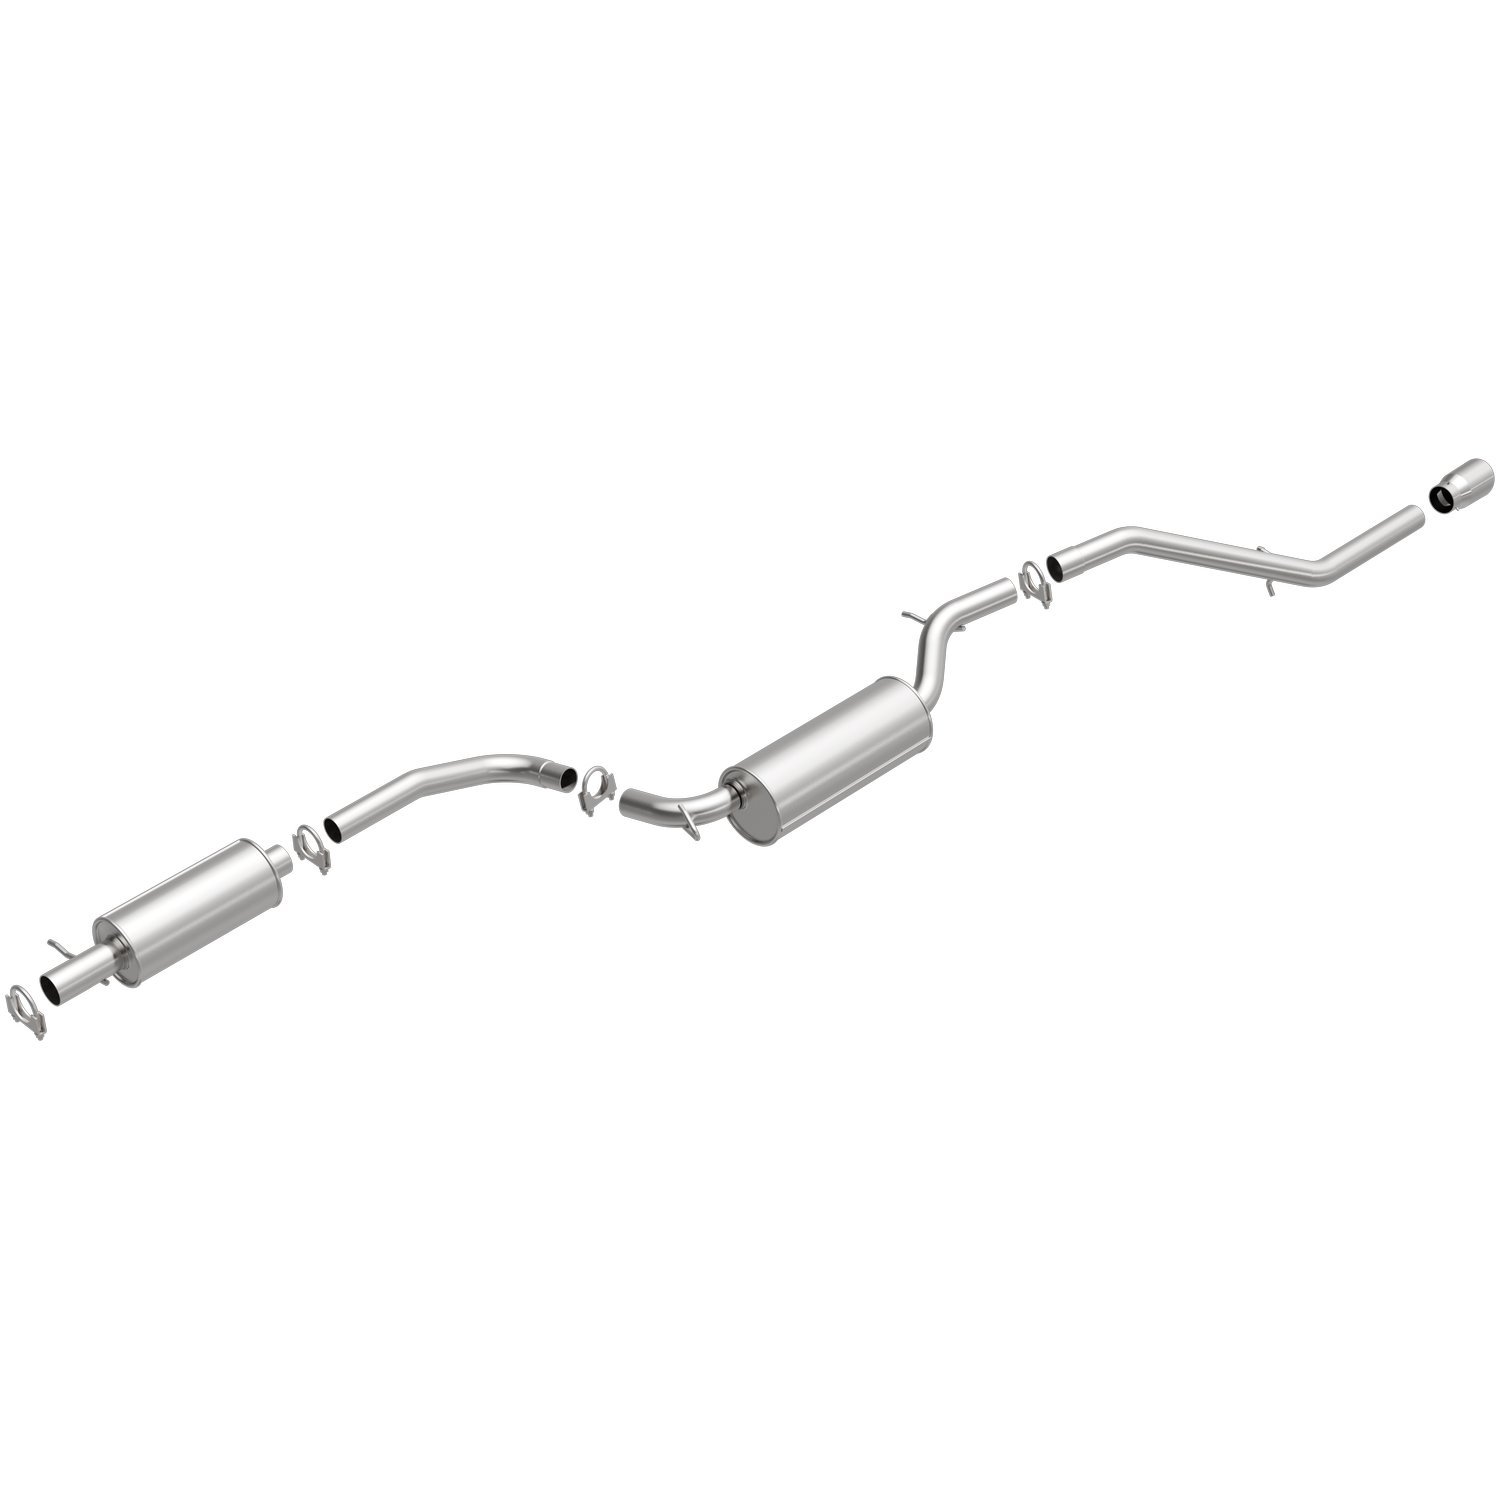 Direct-Fit Exhaust Kit, 2004-2009 Mazda 3